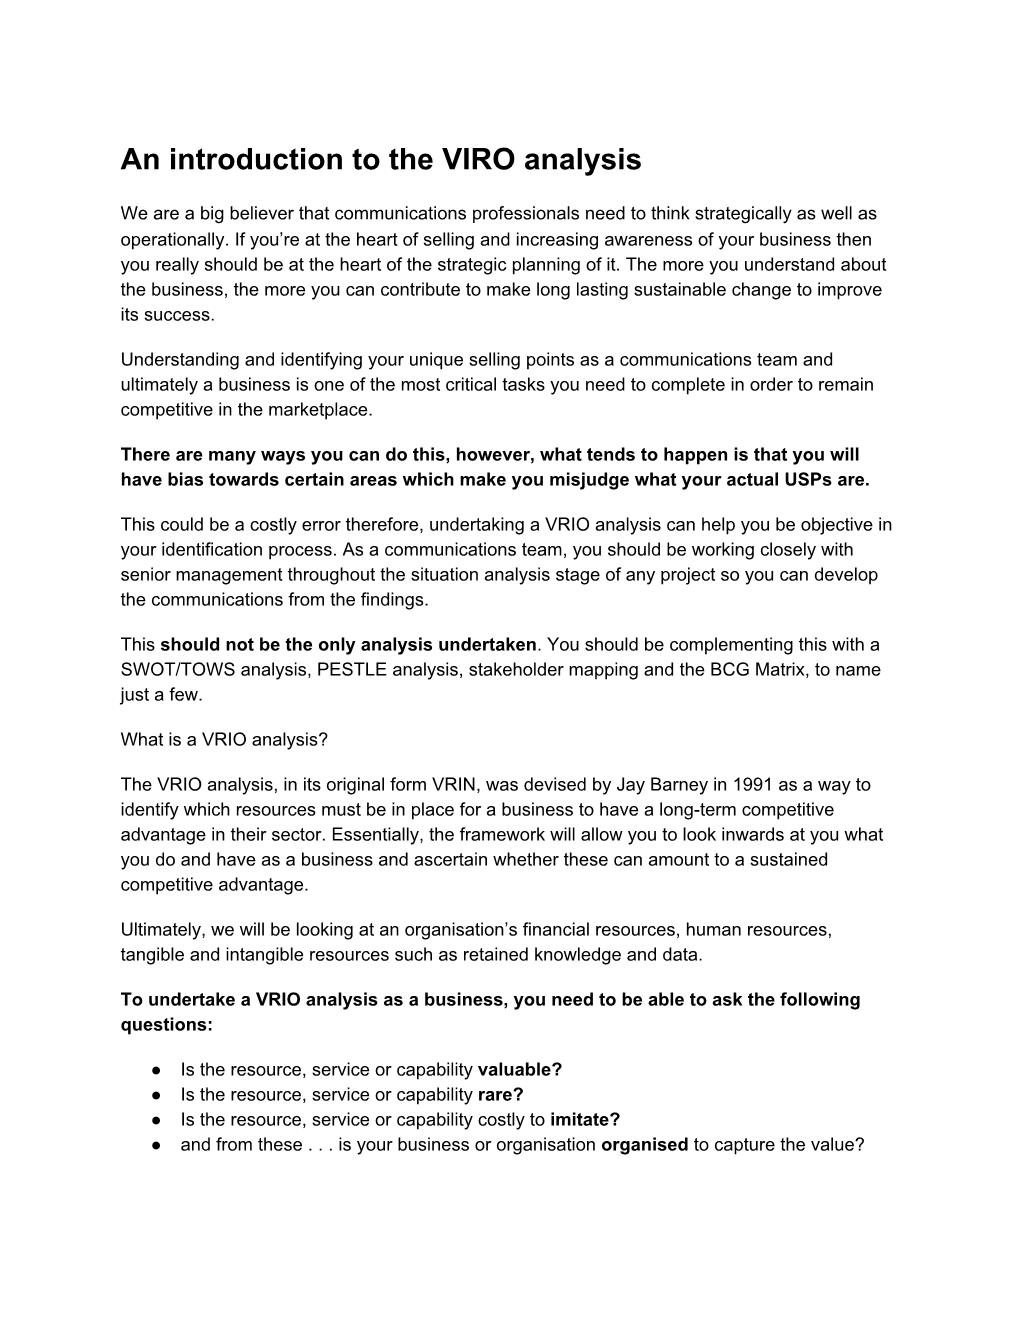 An Introduction to the VIRO Analysis